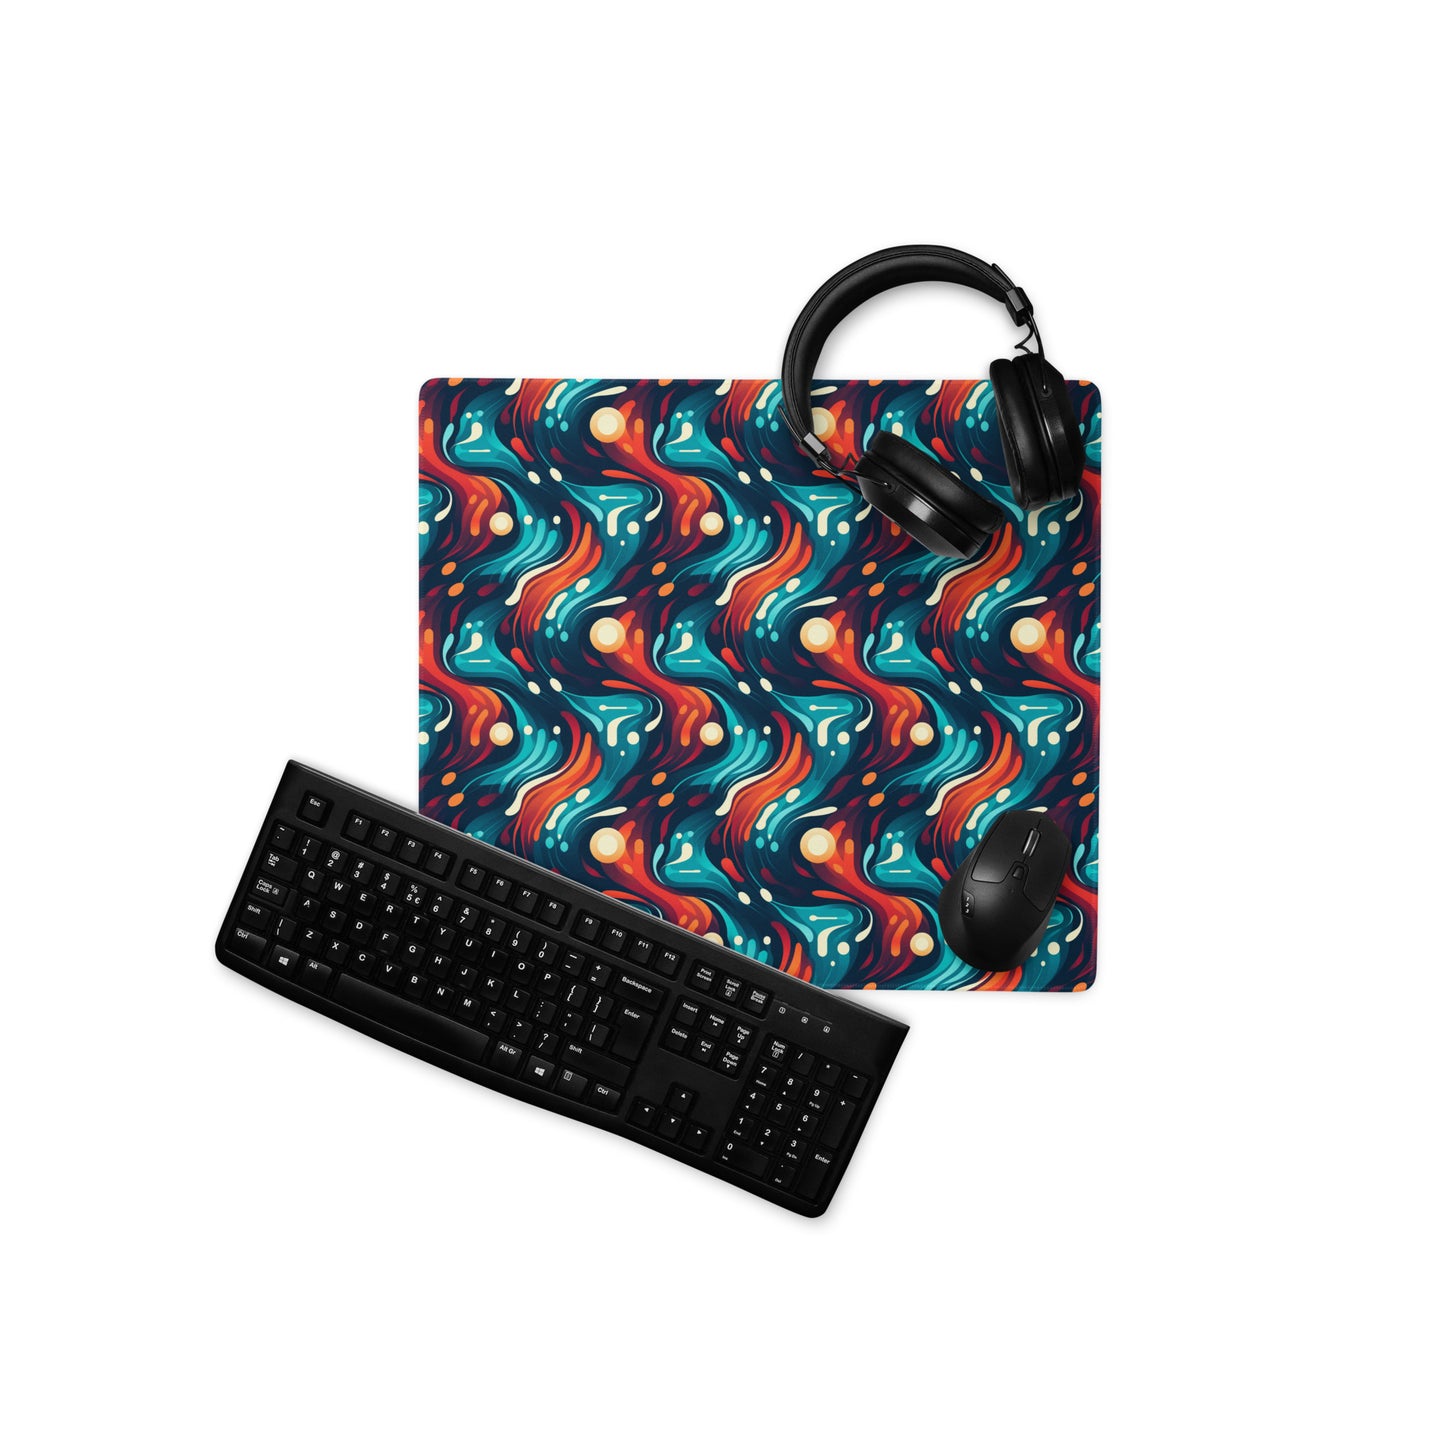 A 18" x 16" desk pad with a blue and orange wavy pattern. With a keyboard, mouse, and headphones sitting on it.